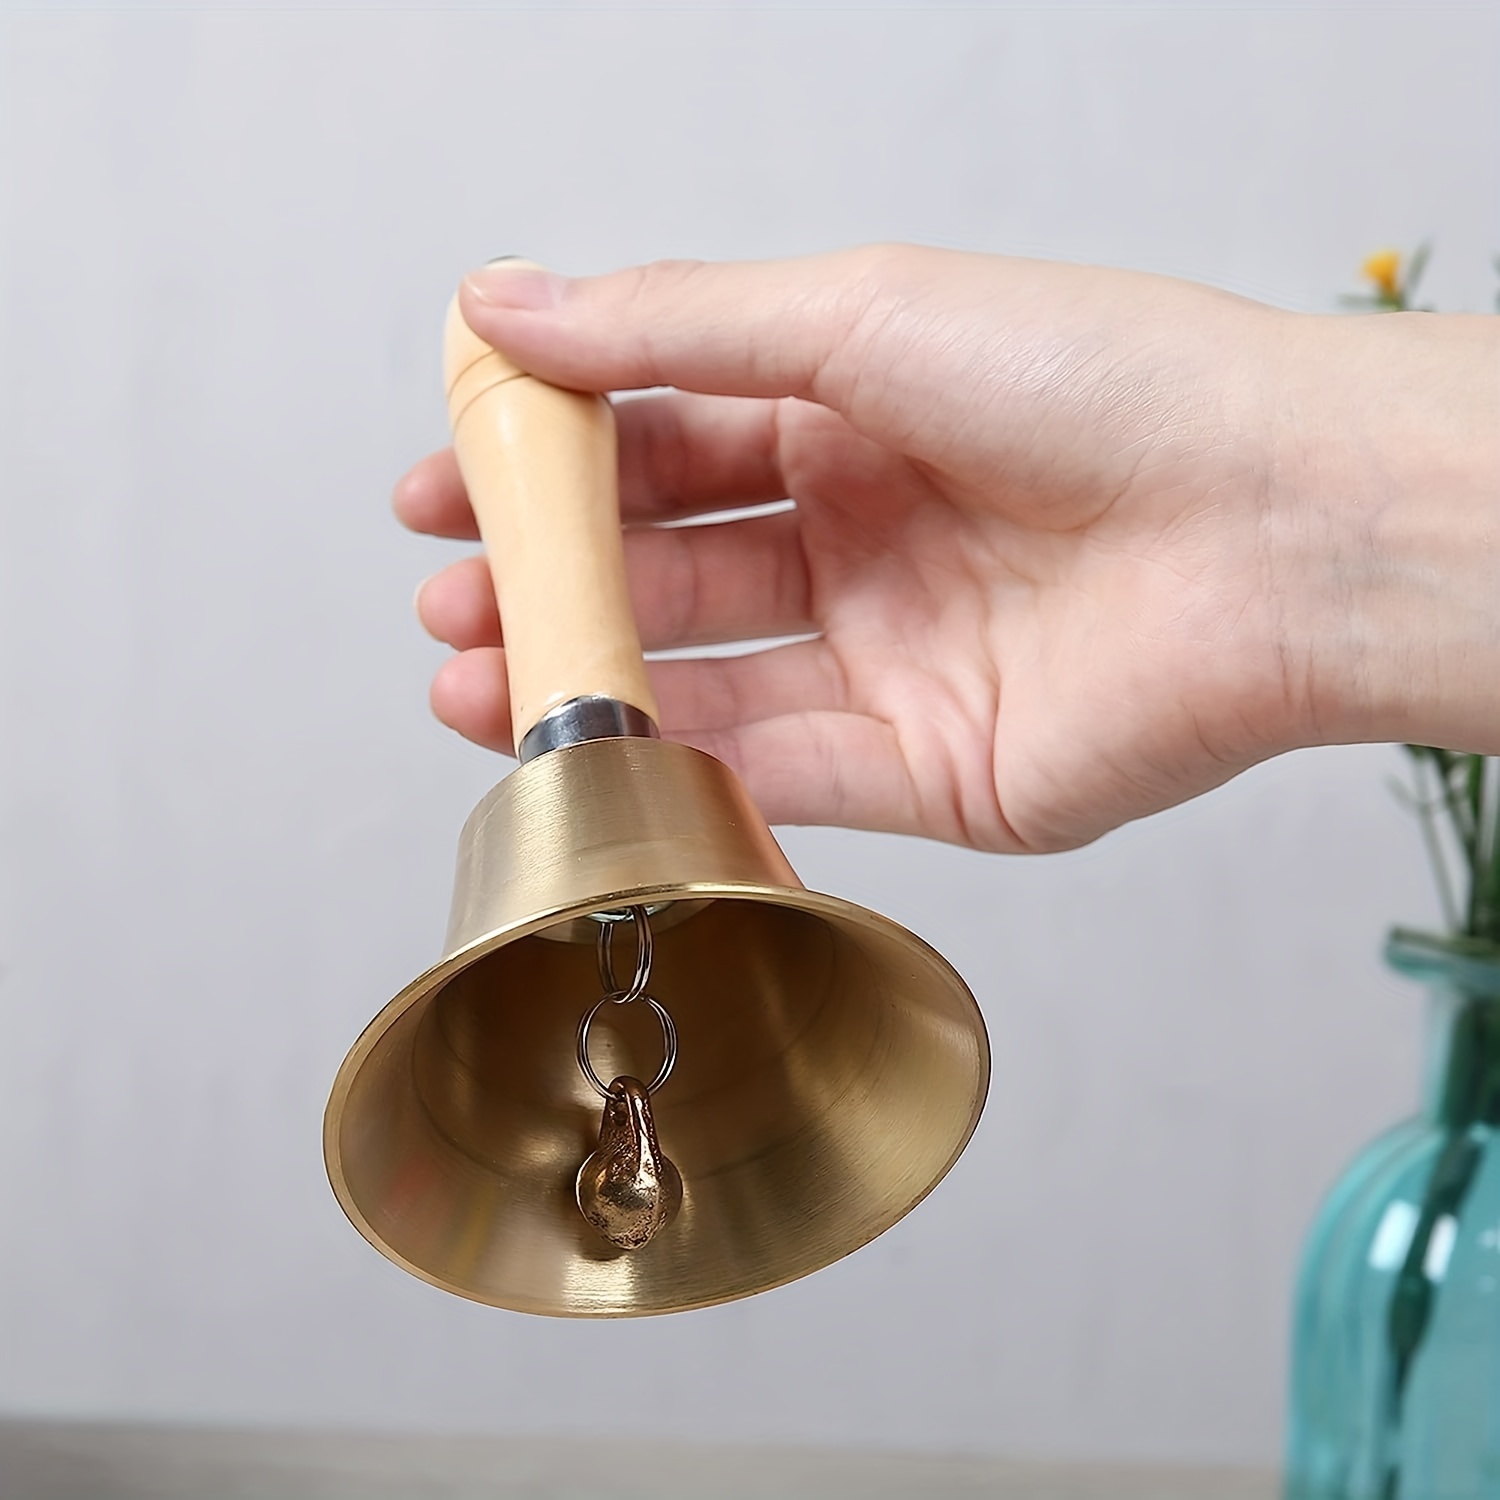 Sopcone Hand Bell Extra Loud Solid Brass Call Bell Handbells with Wooden  Handle Multi-Purpose for School, Churchl, Hotel, Christmas and Wedding